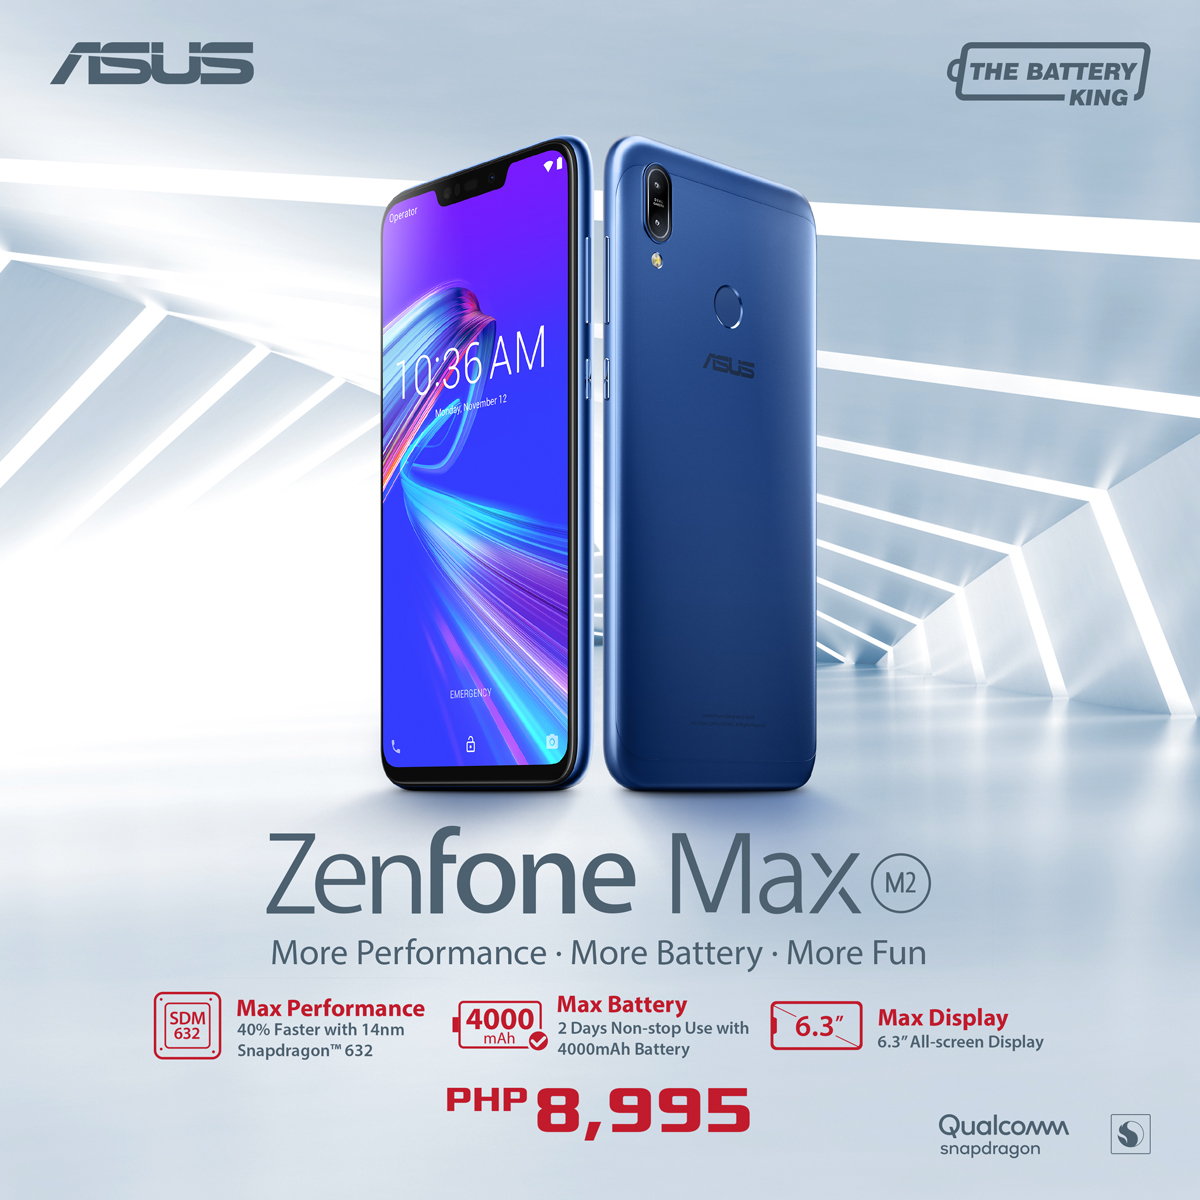 All-New ASUS ZenFone Max (M2) Features 4,000 mAh Battery and Amazing Performance in a Slim and Compact Design